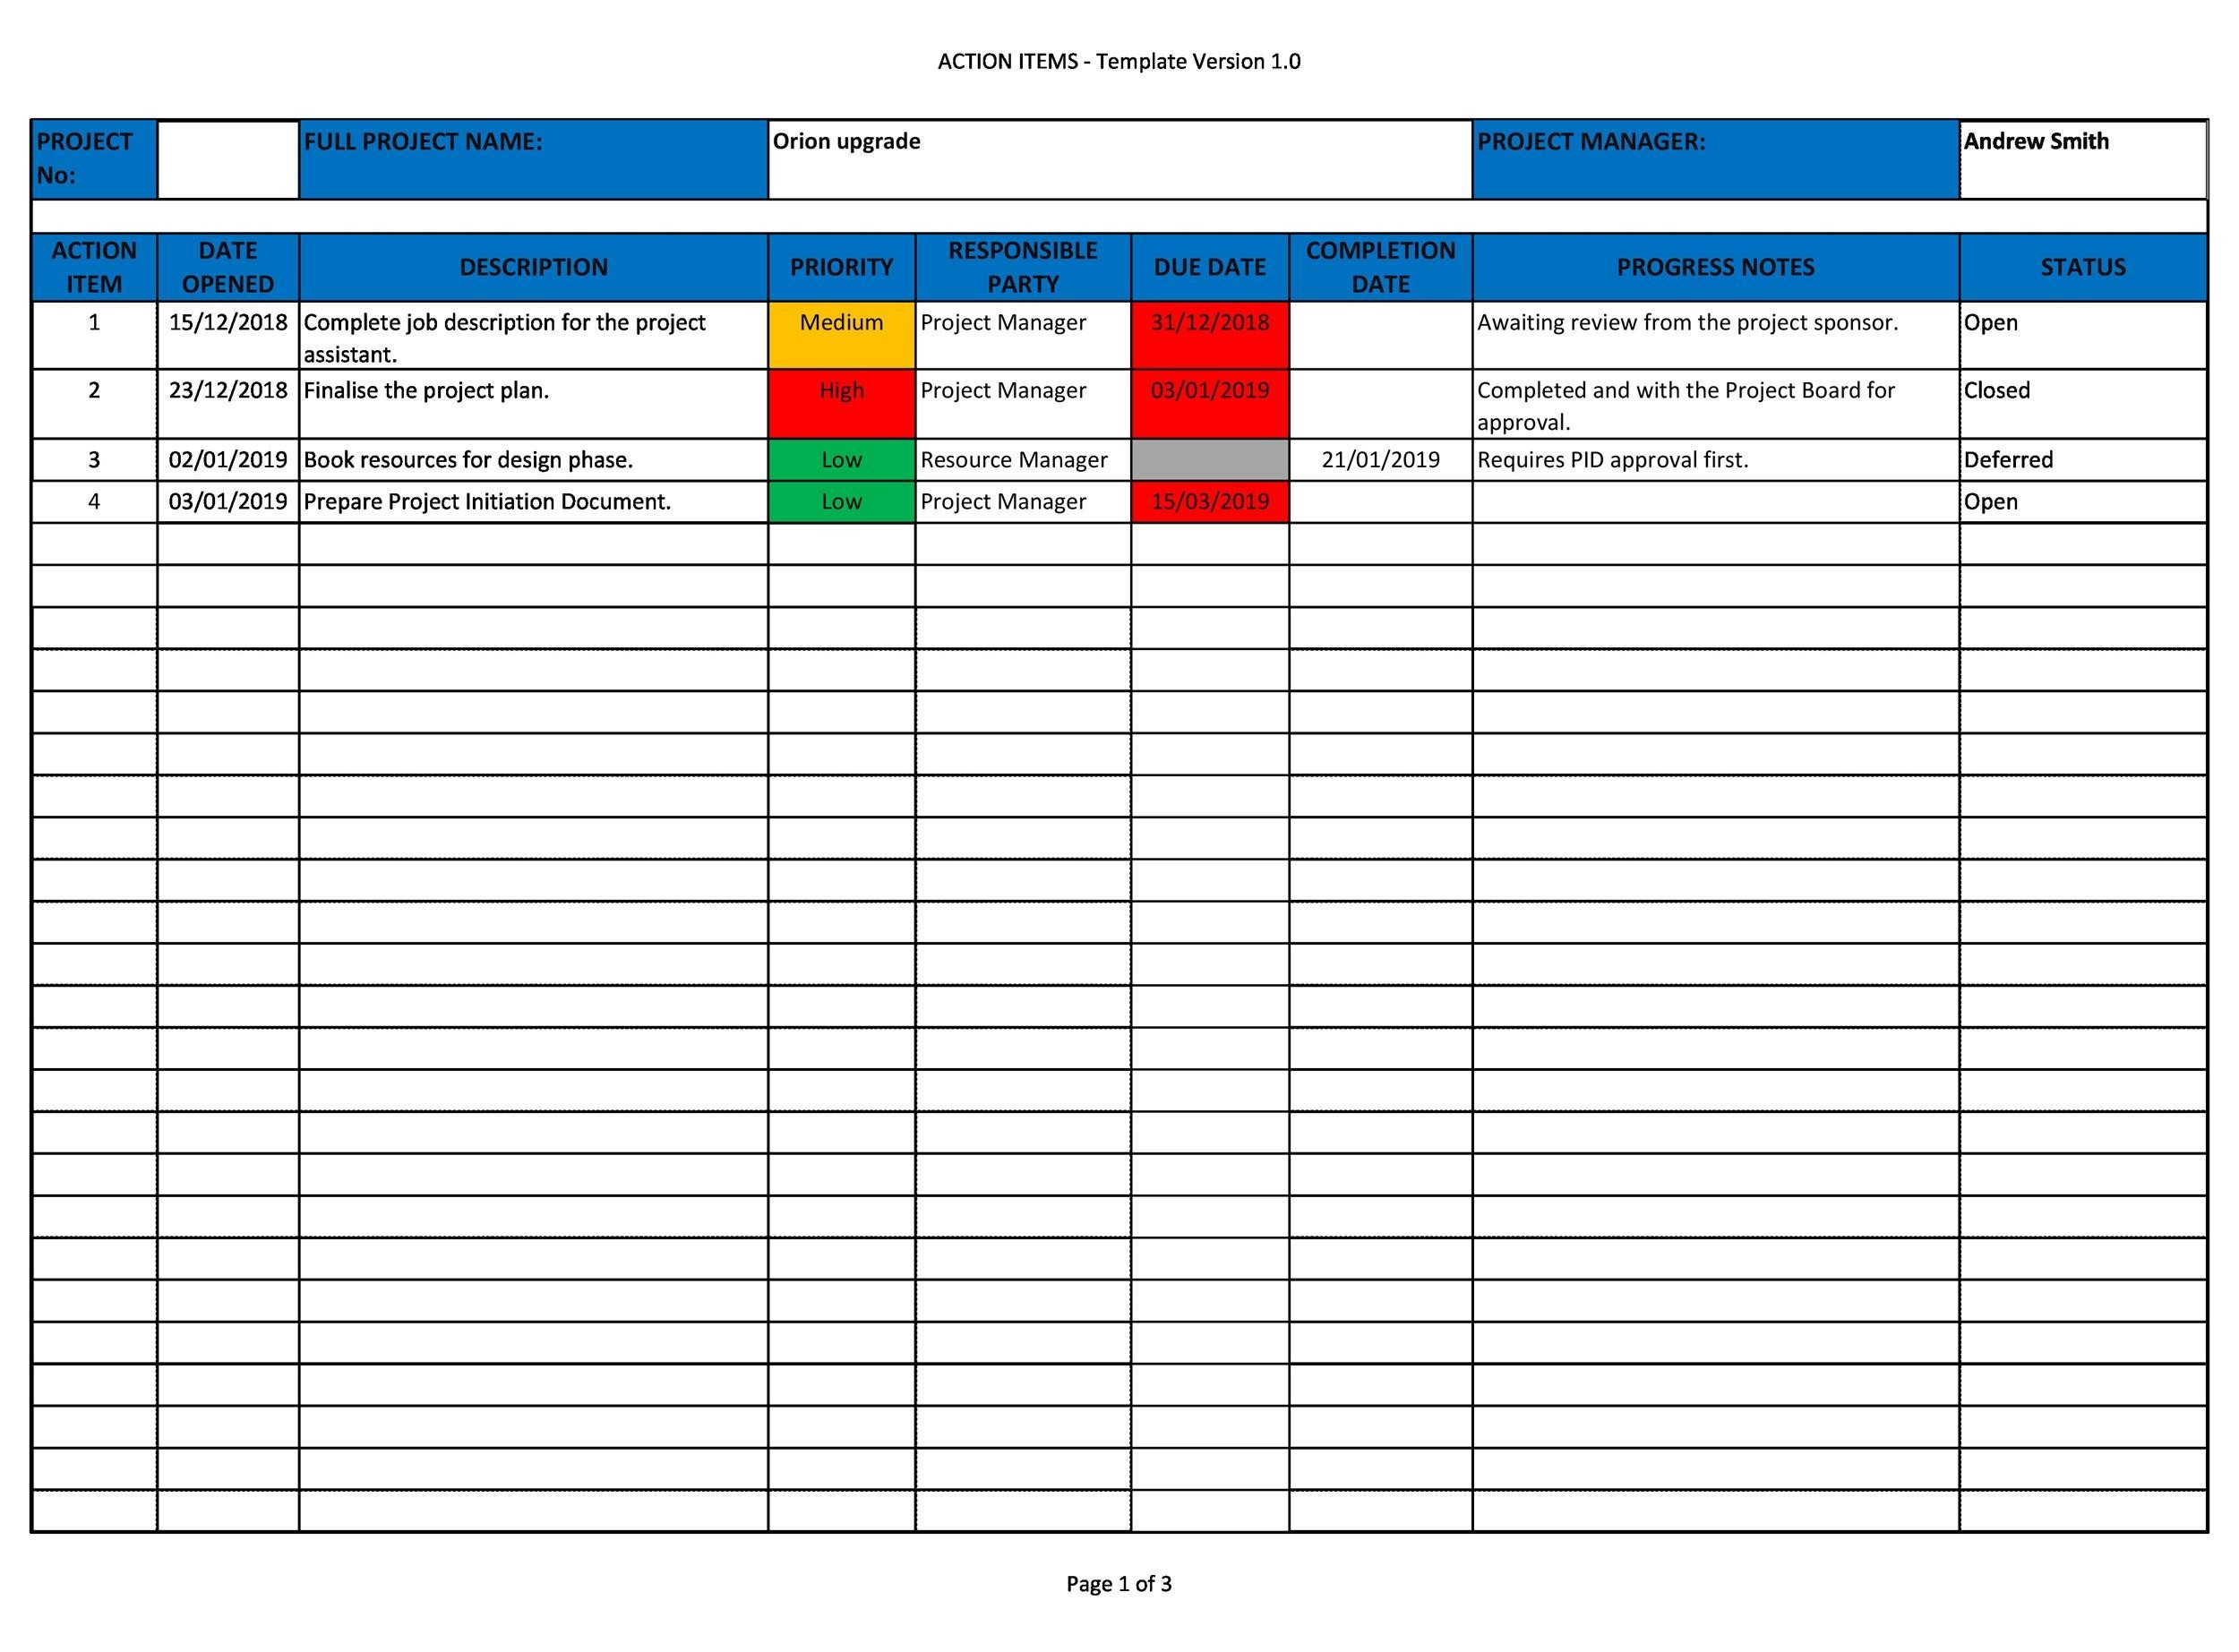 49 Great Action Item Templates MS Word Excel TemplateLab